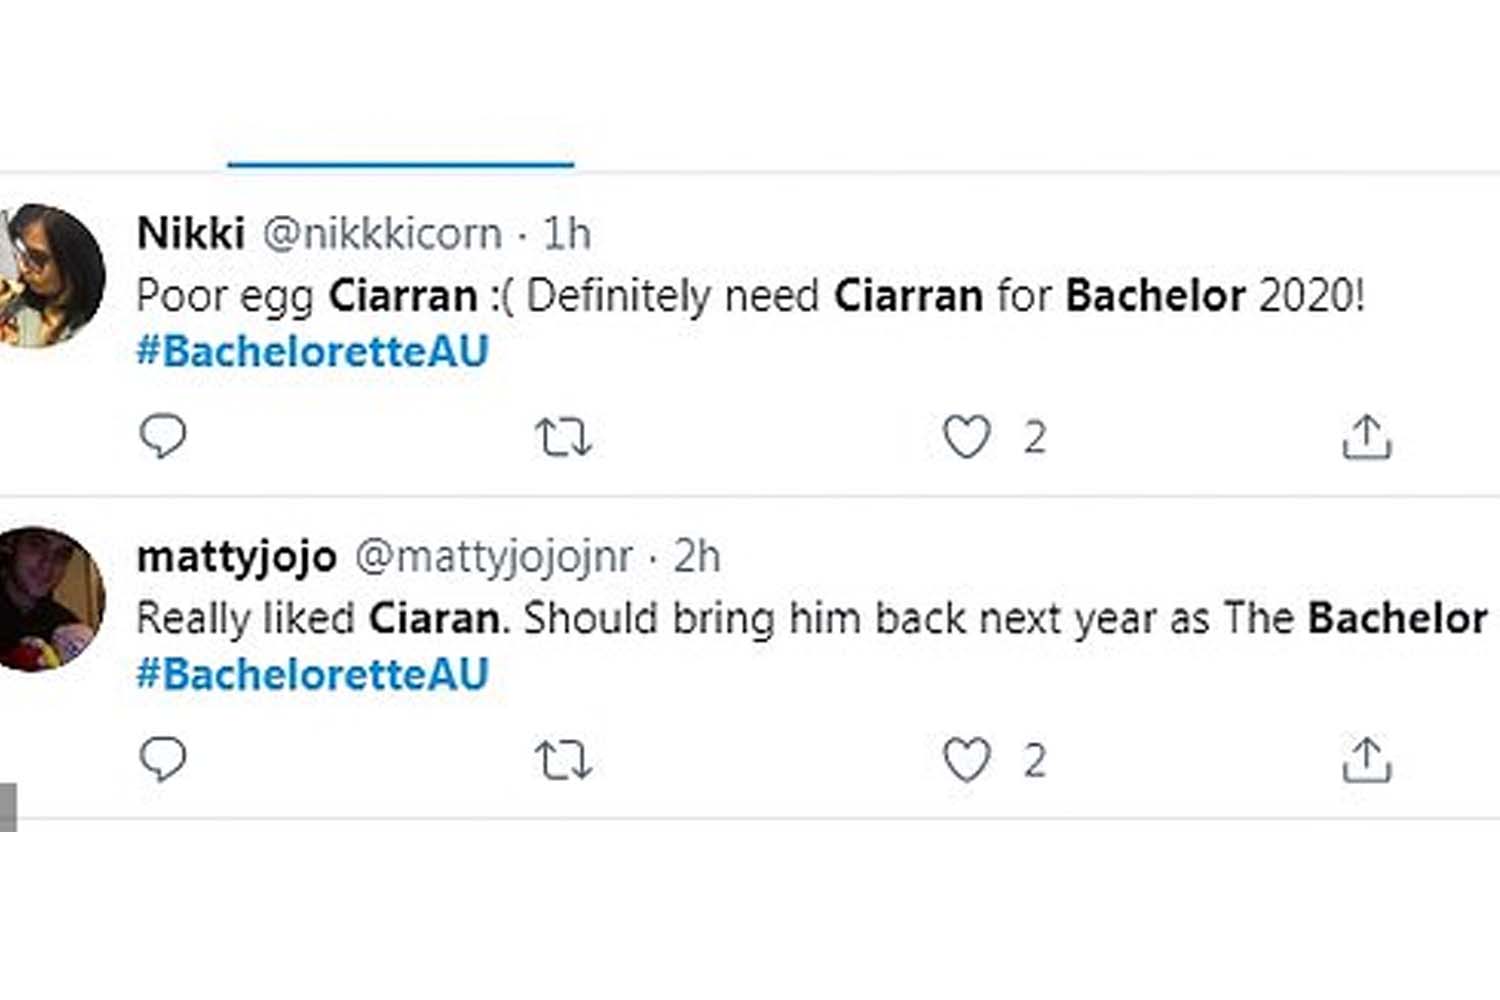 Fans of The Bachelorette want Ciarran to be the next Bachelor